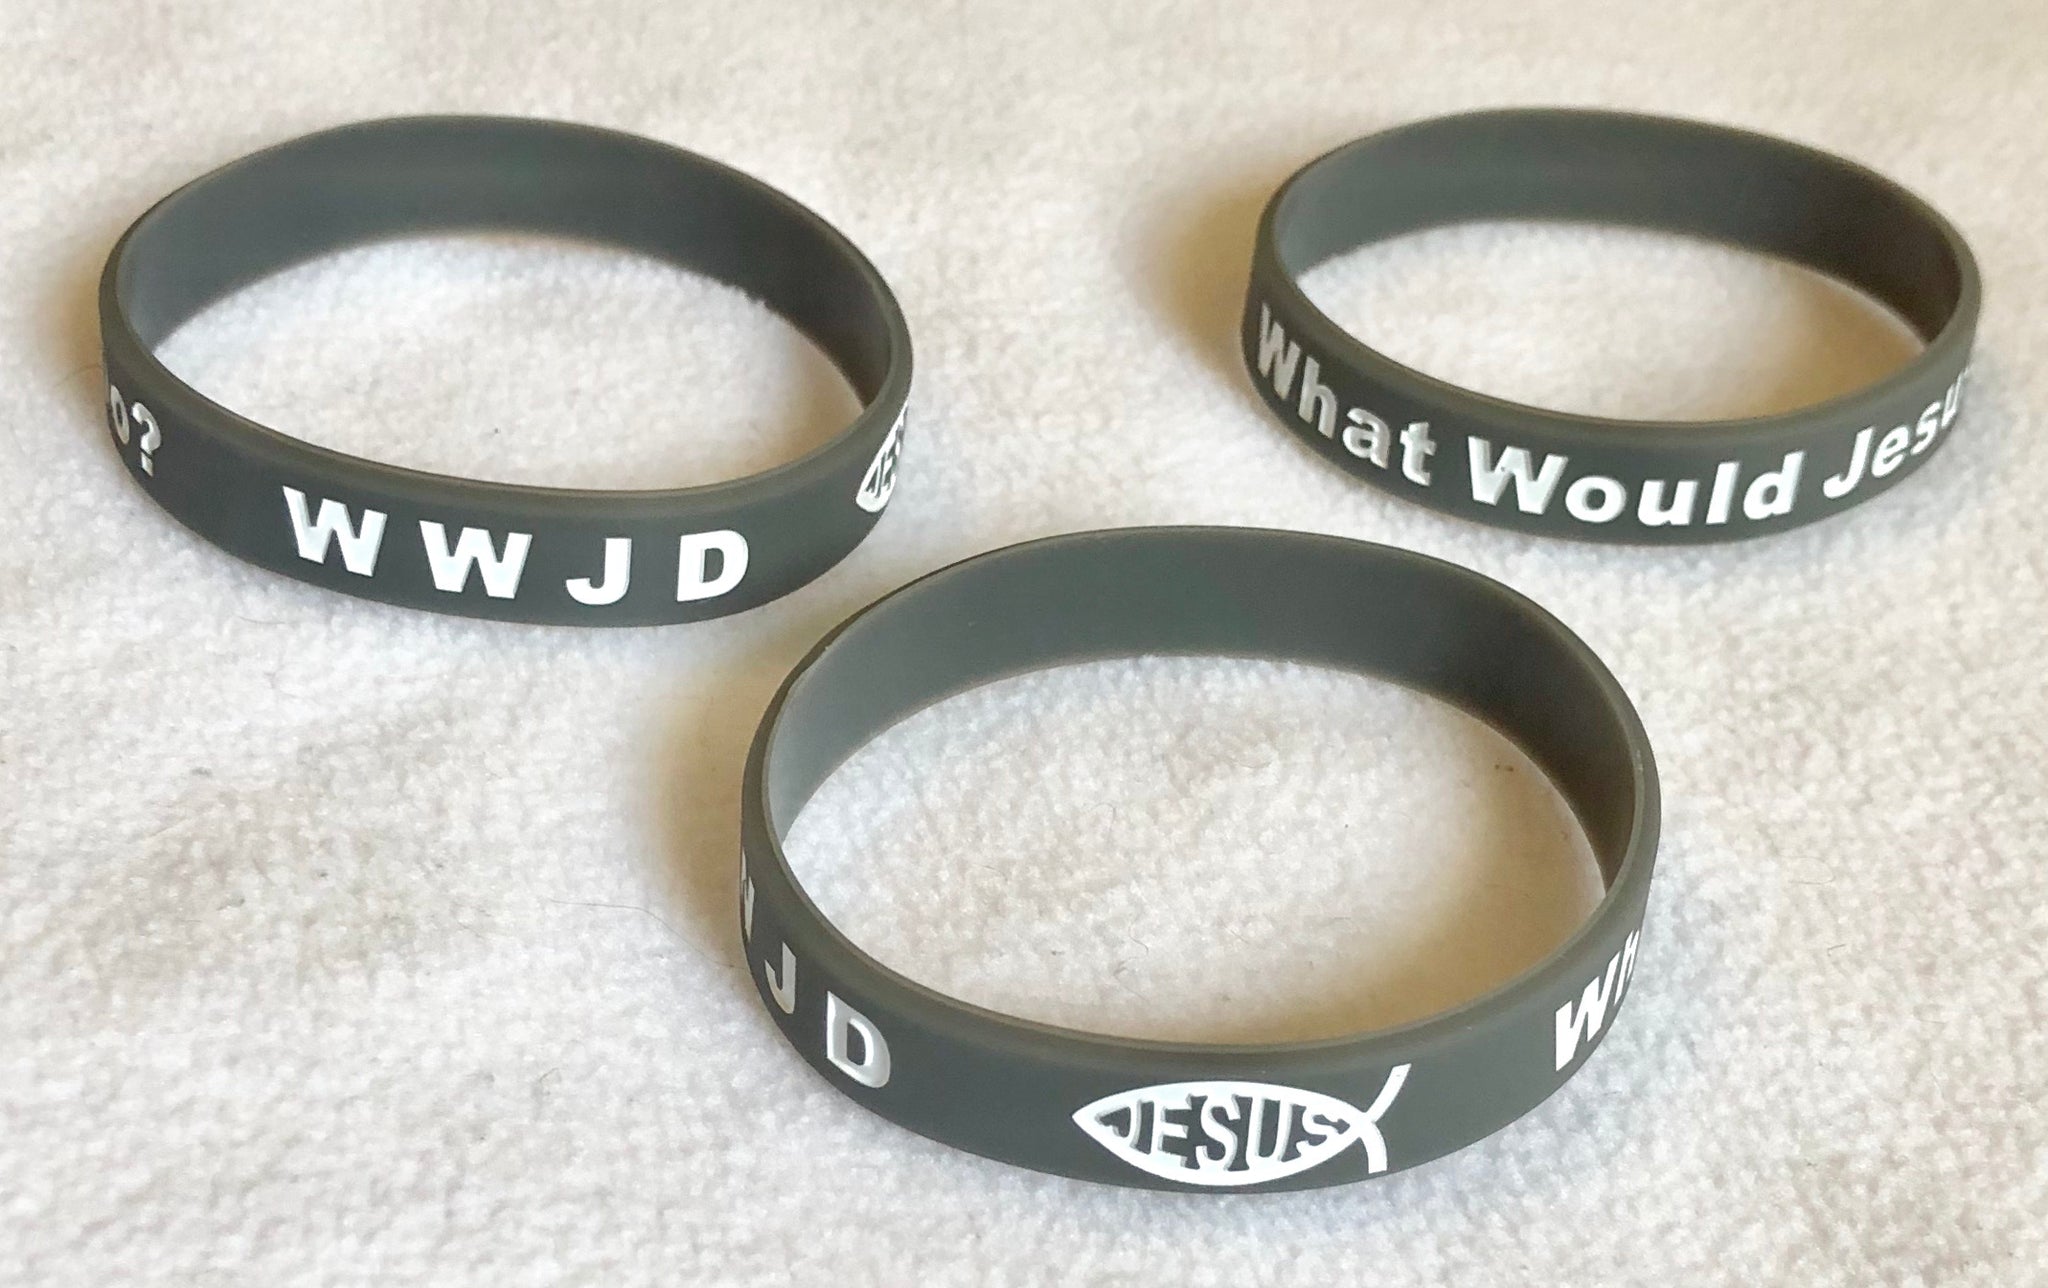 1 PC WWJD What Would Jesus Do Silicone Rubber Bracelet One Inch Wide Blue  Bangle